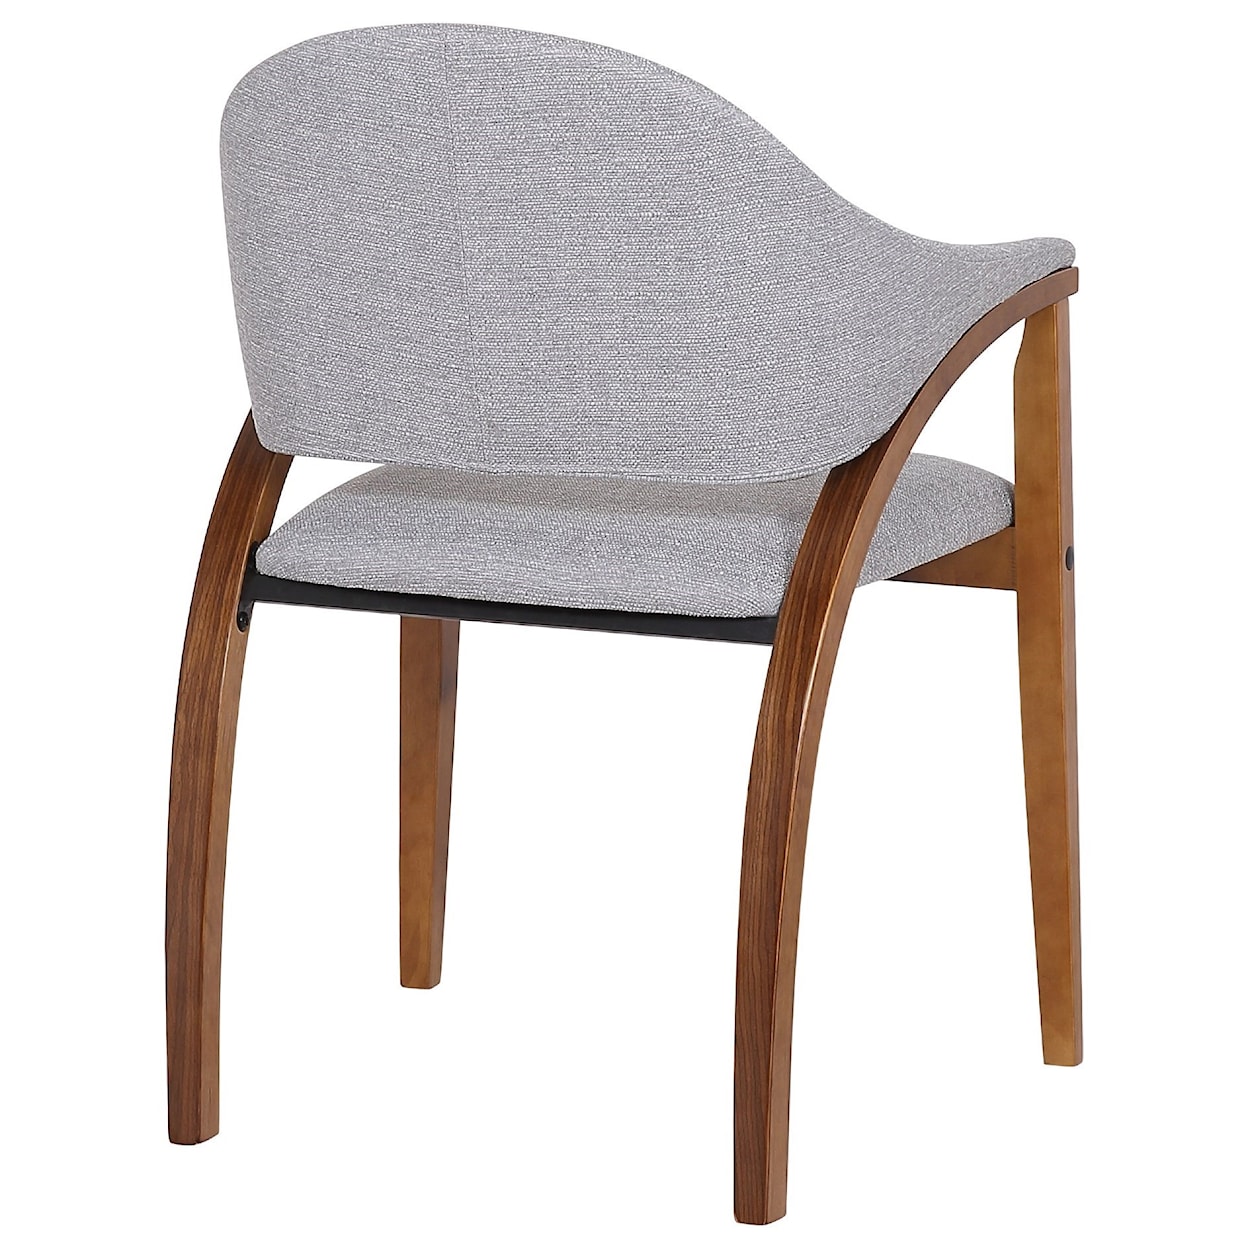 Armen Living Meadow Contemporary Dining Chair - Set of 2